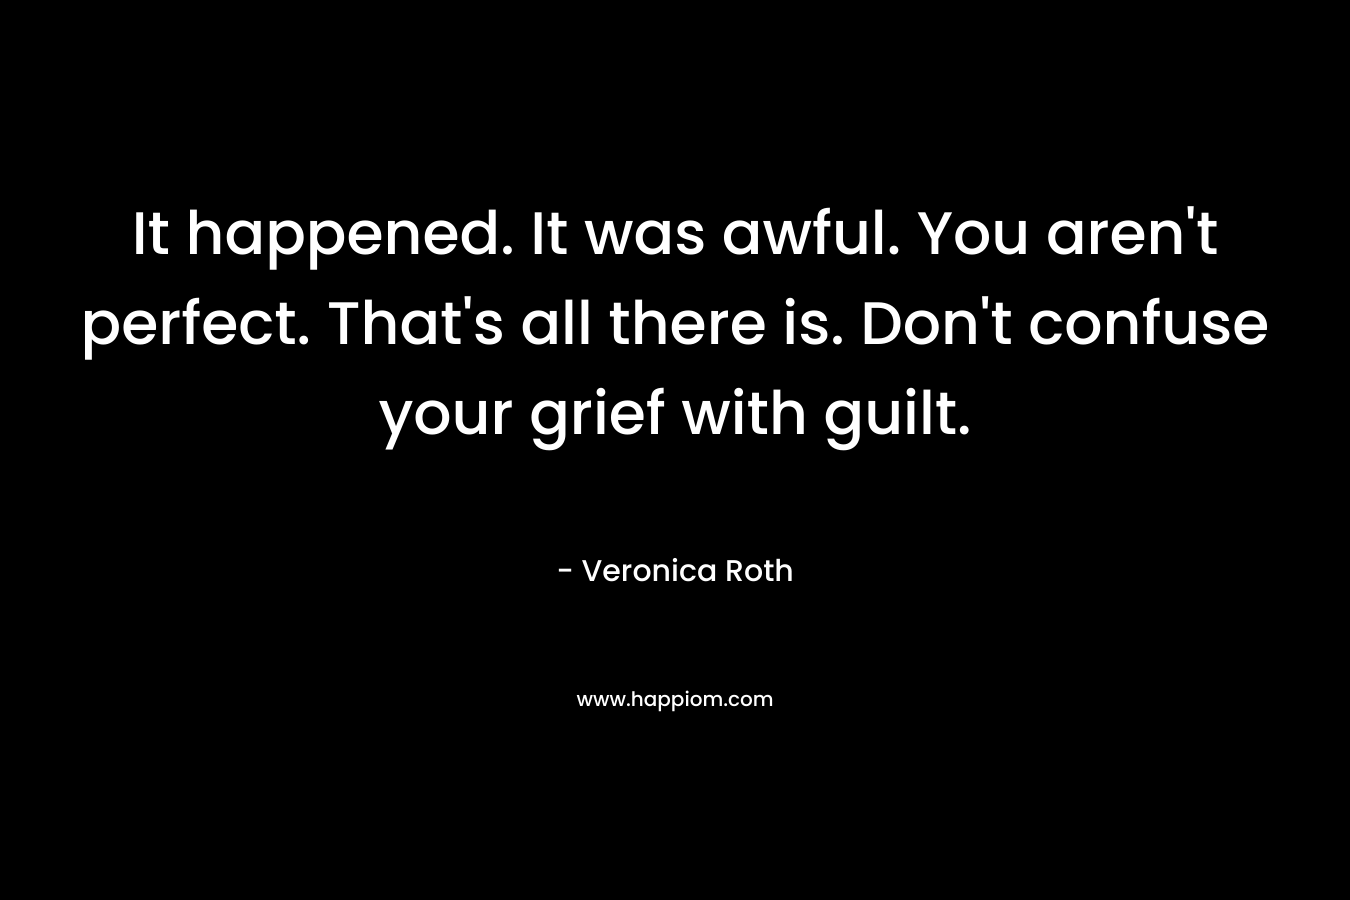 It happened. It was awful. You aren't perfect. That's all there is. Don't confuse your grief with guilt.